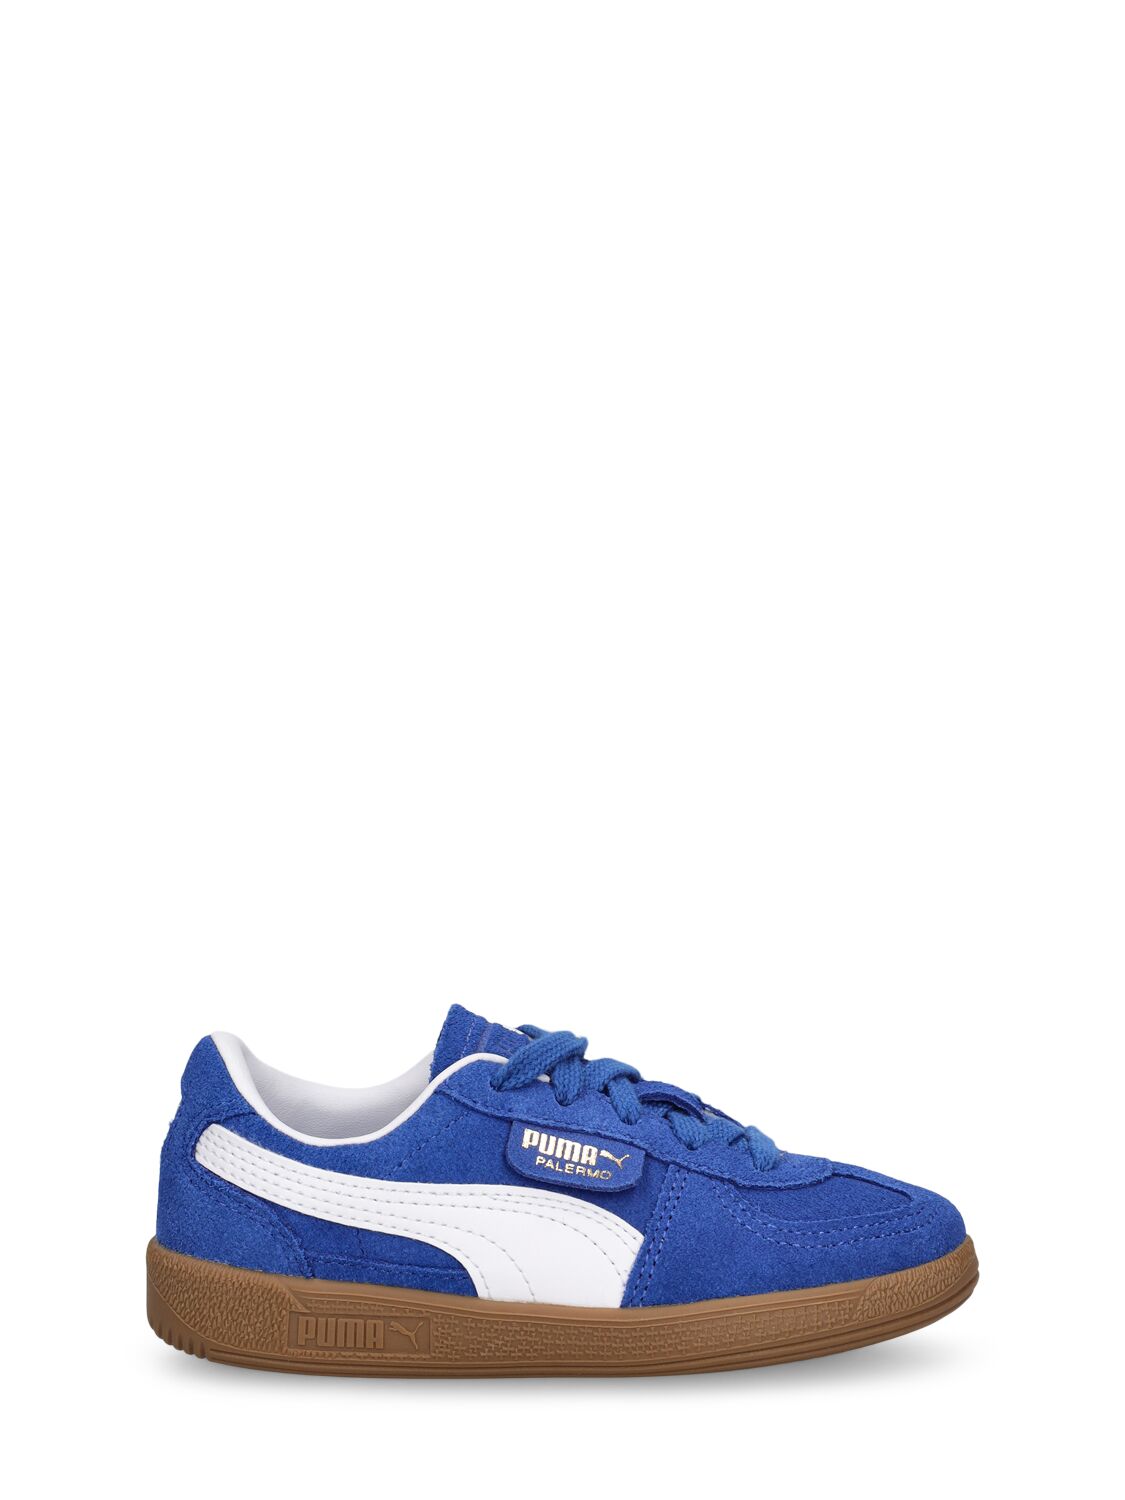 Puma Kids' Palermo Ps Lace-up Trainers In Blue